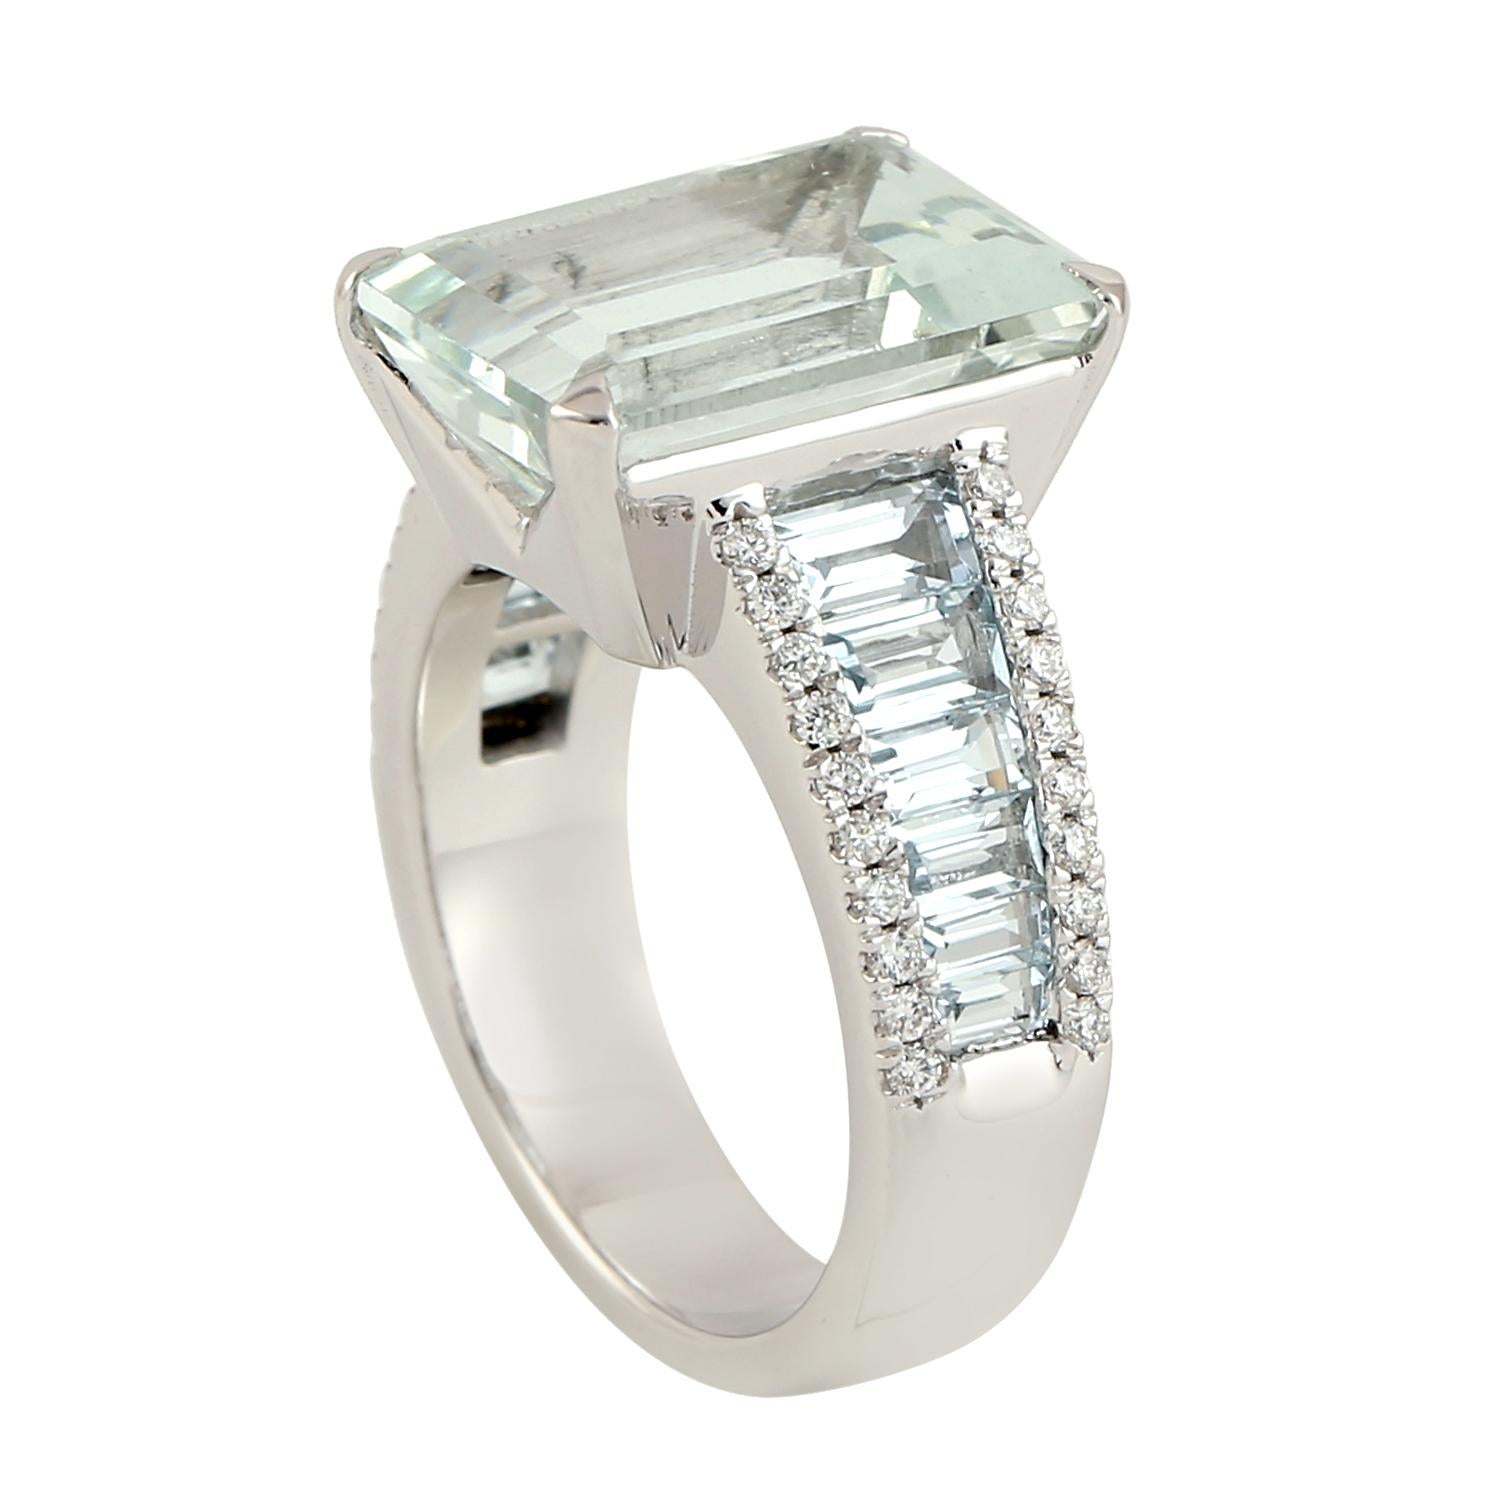 Mixed Cut Emerald Cut Aquamarine Baguette Ring With Diamonds Made in 18k White Gold For Sale